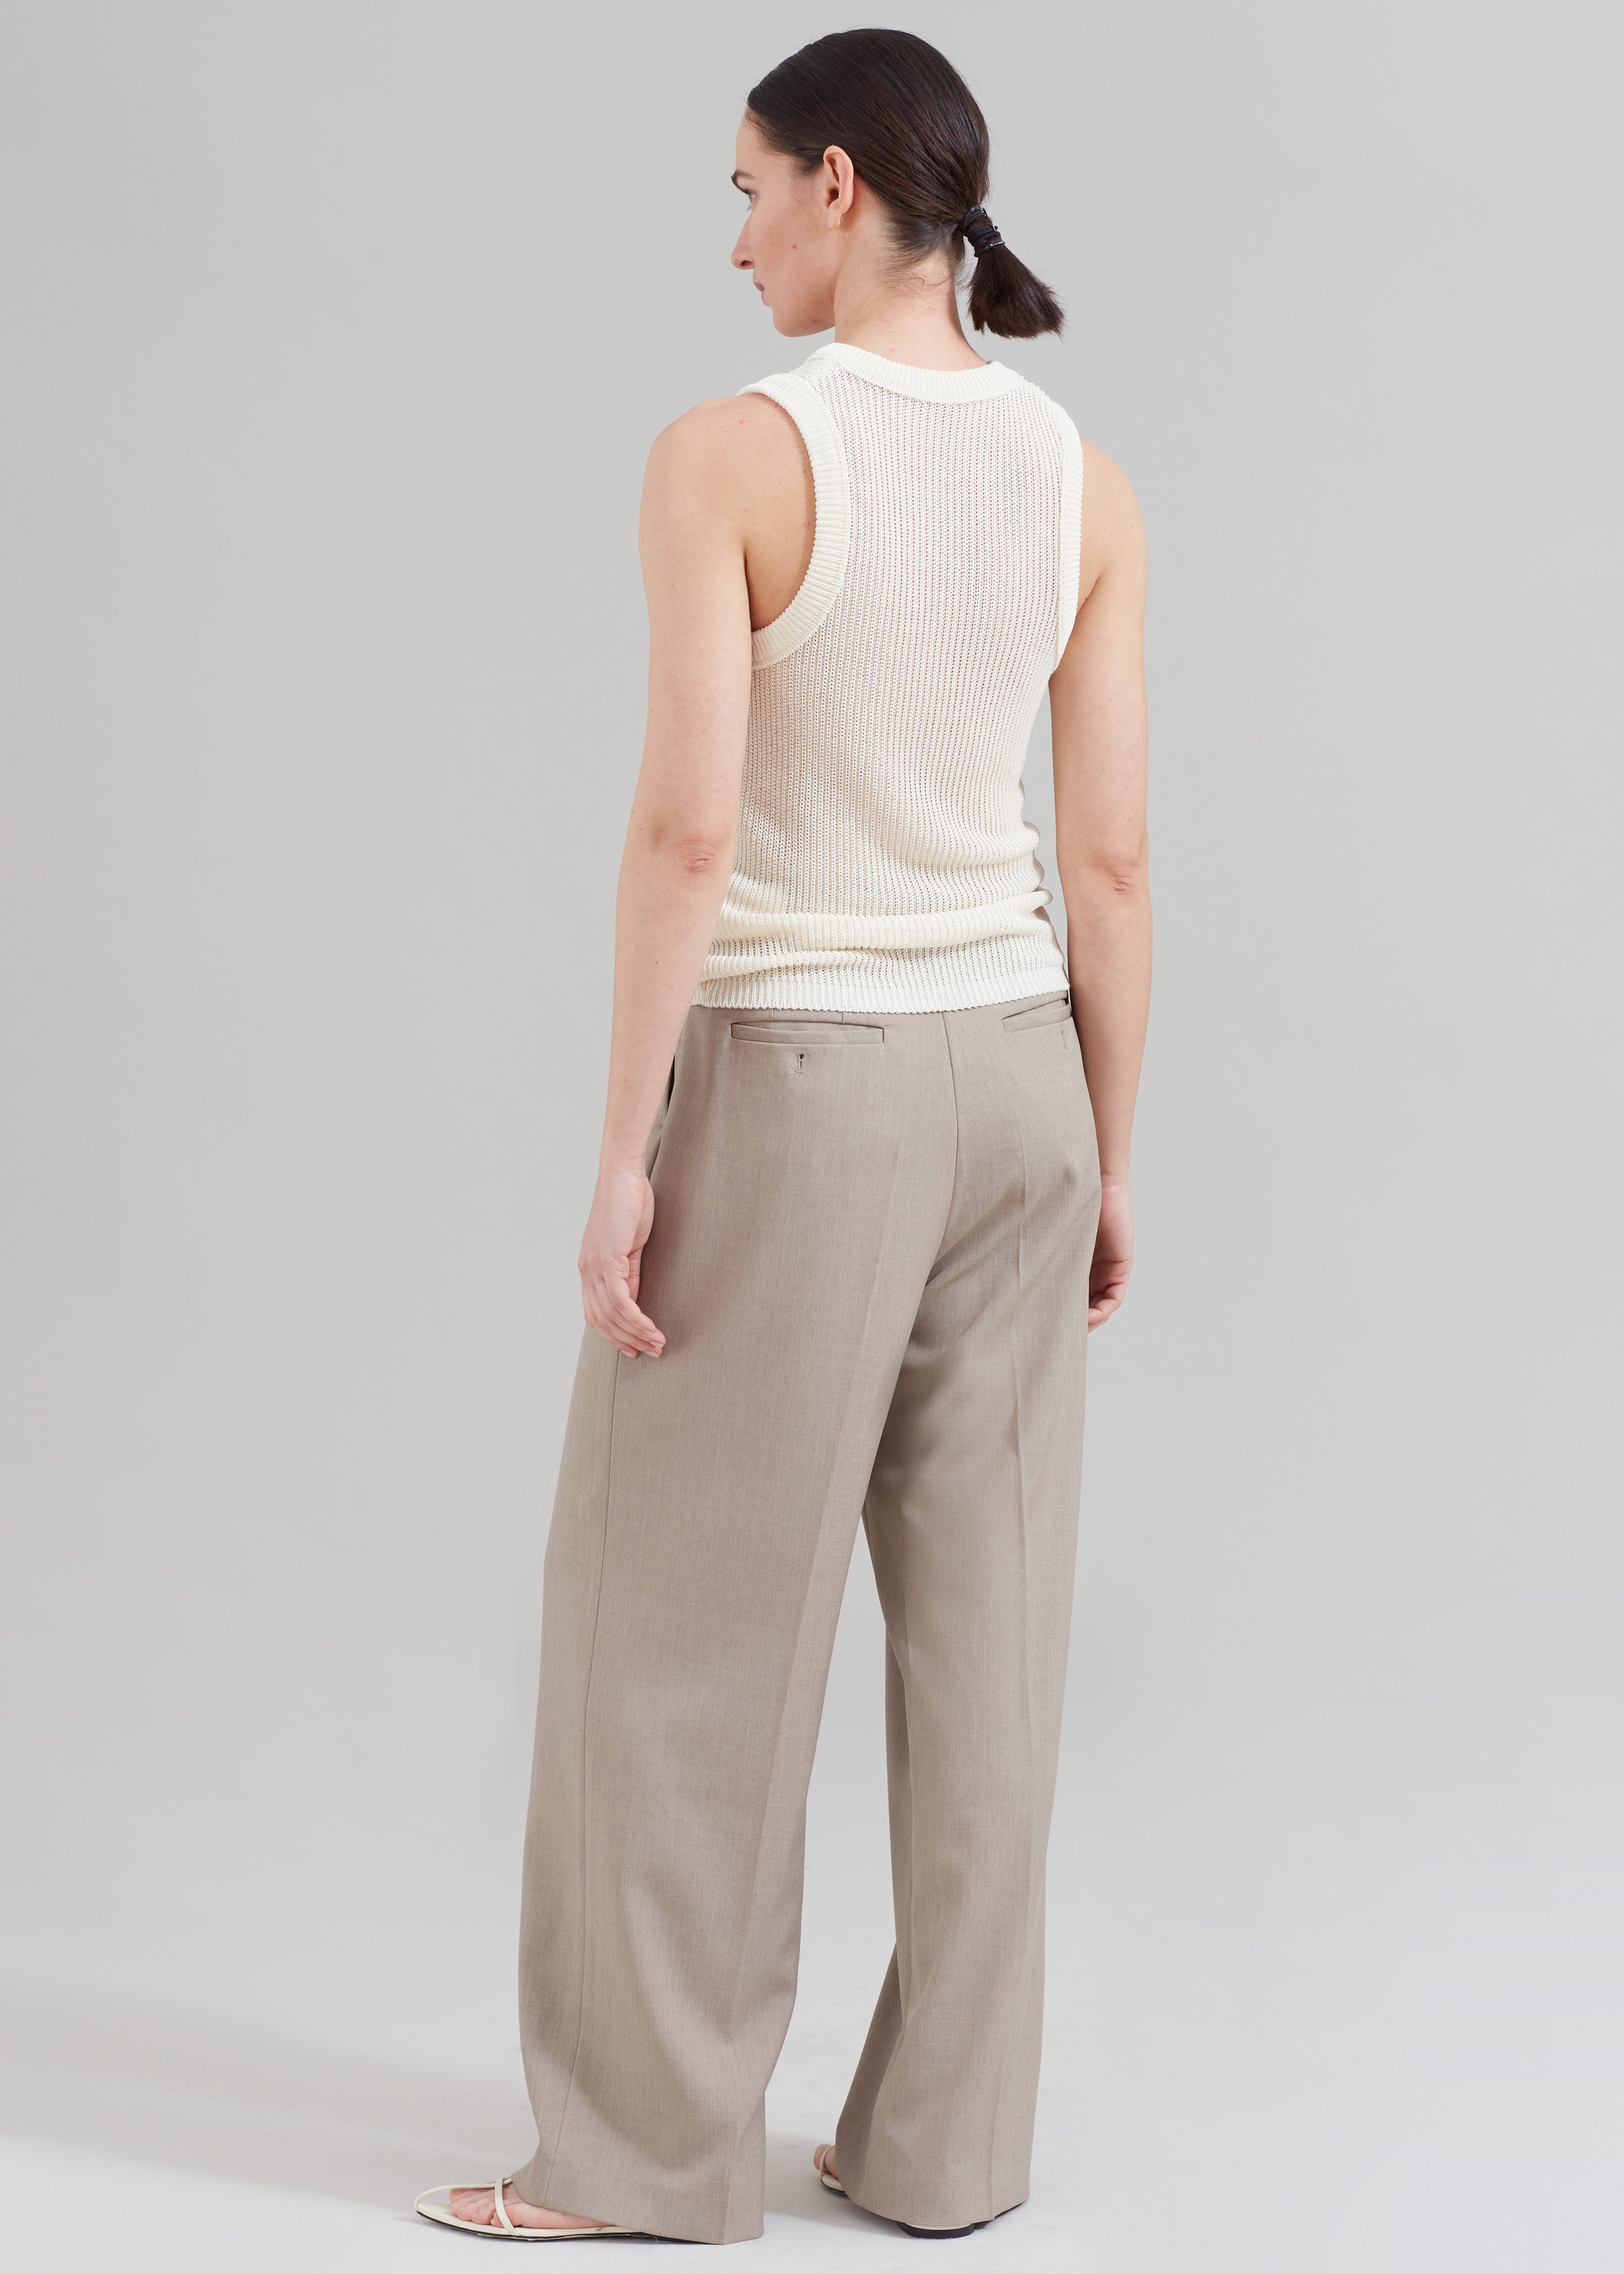 Madame Beige Ankle Length Cotton Trousers | Buy SIZE XL Trouser Online for  | Glamly